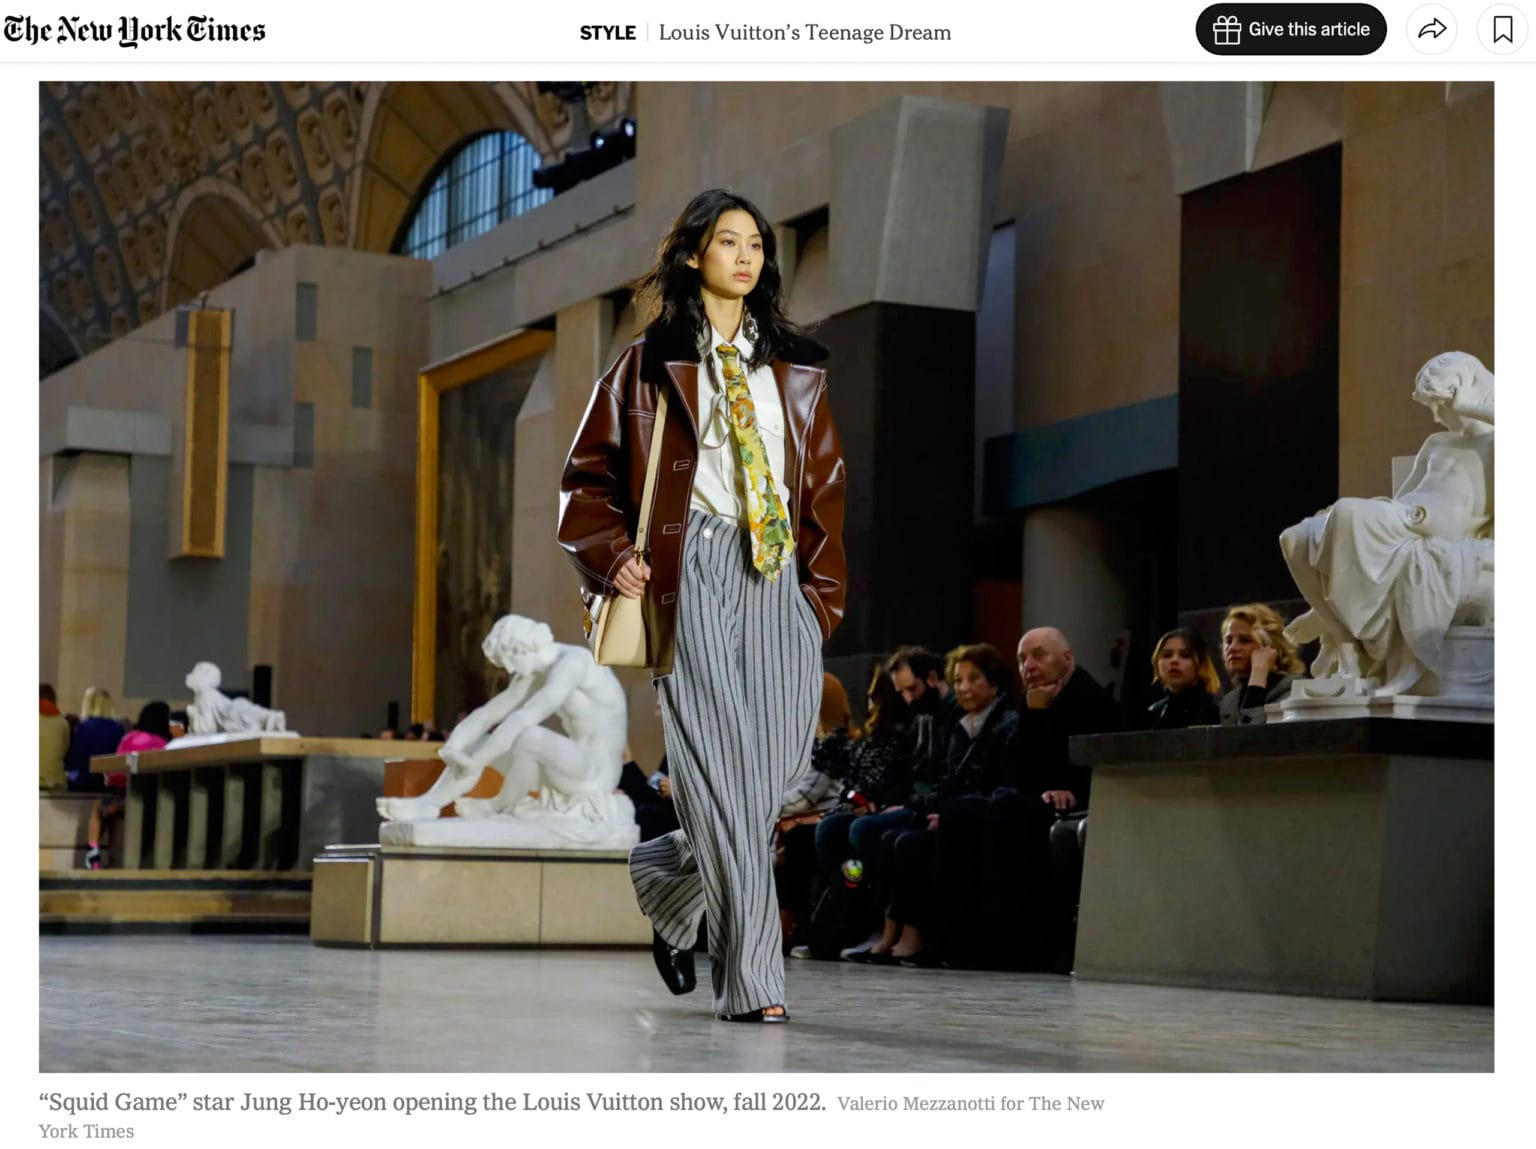 Jung Ho-yeon Opening the Louis Vuitton Fashion show, Photo by Valerio Mezzanotti for The New York Times